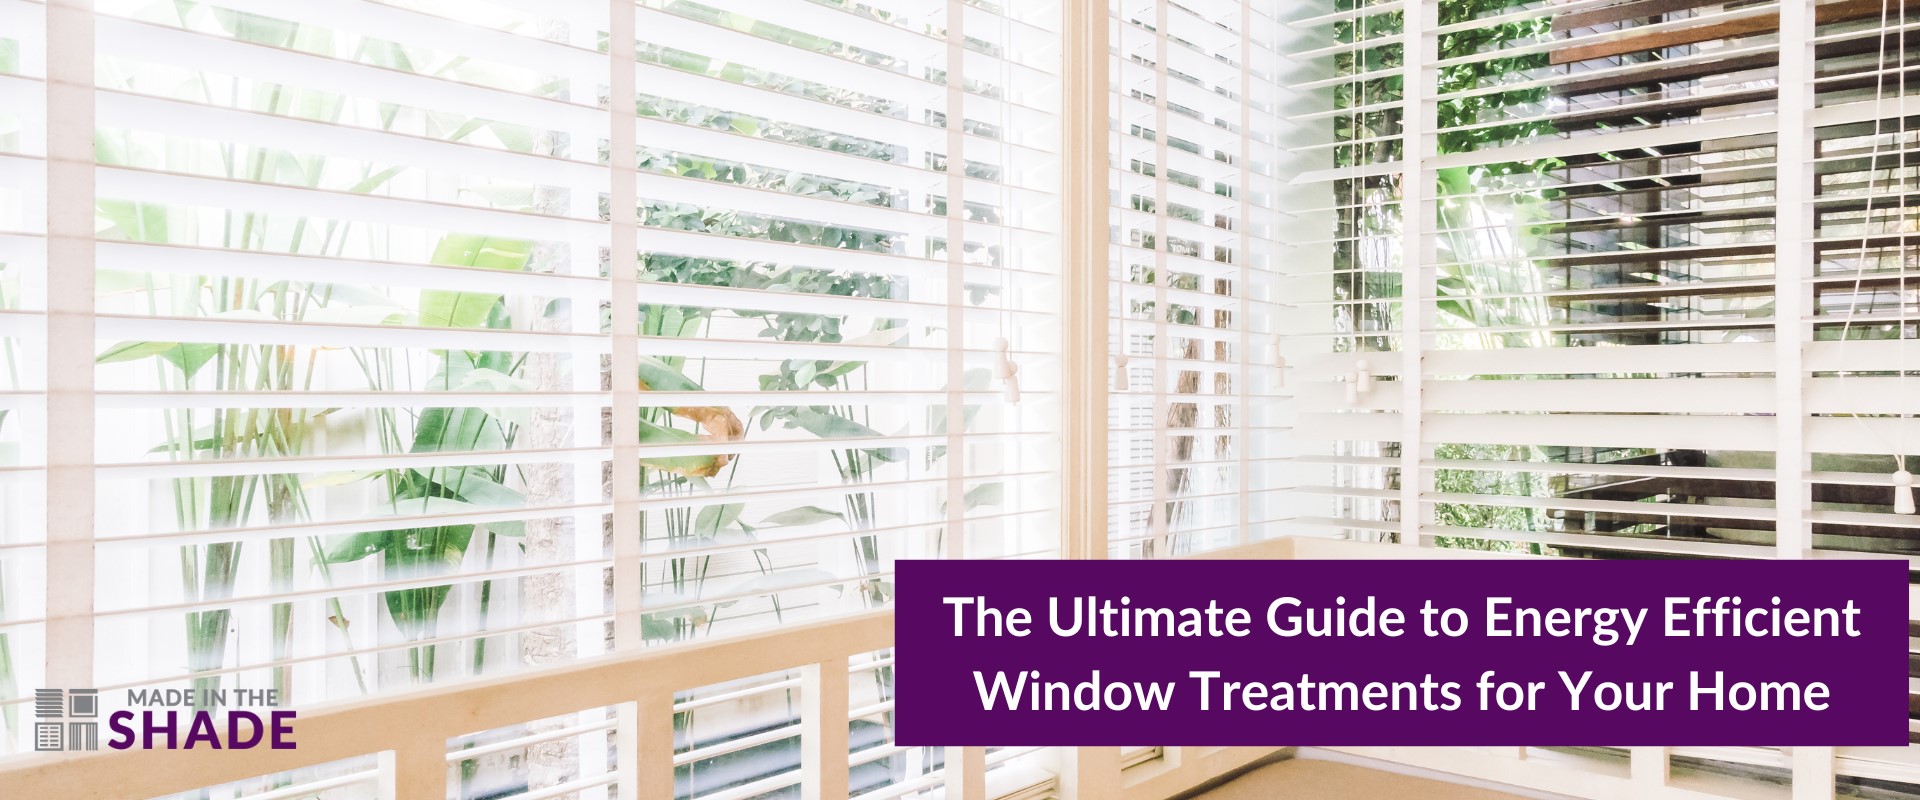 Guide to energy efficient window treatments